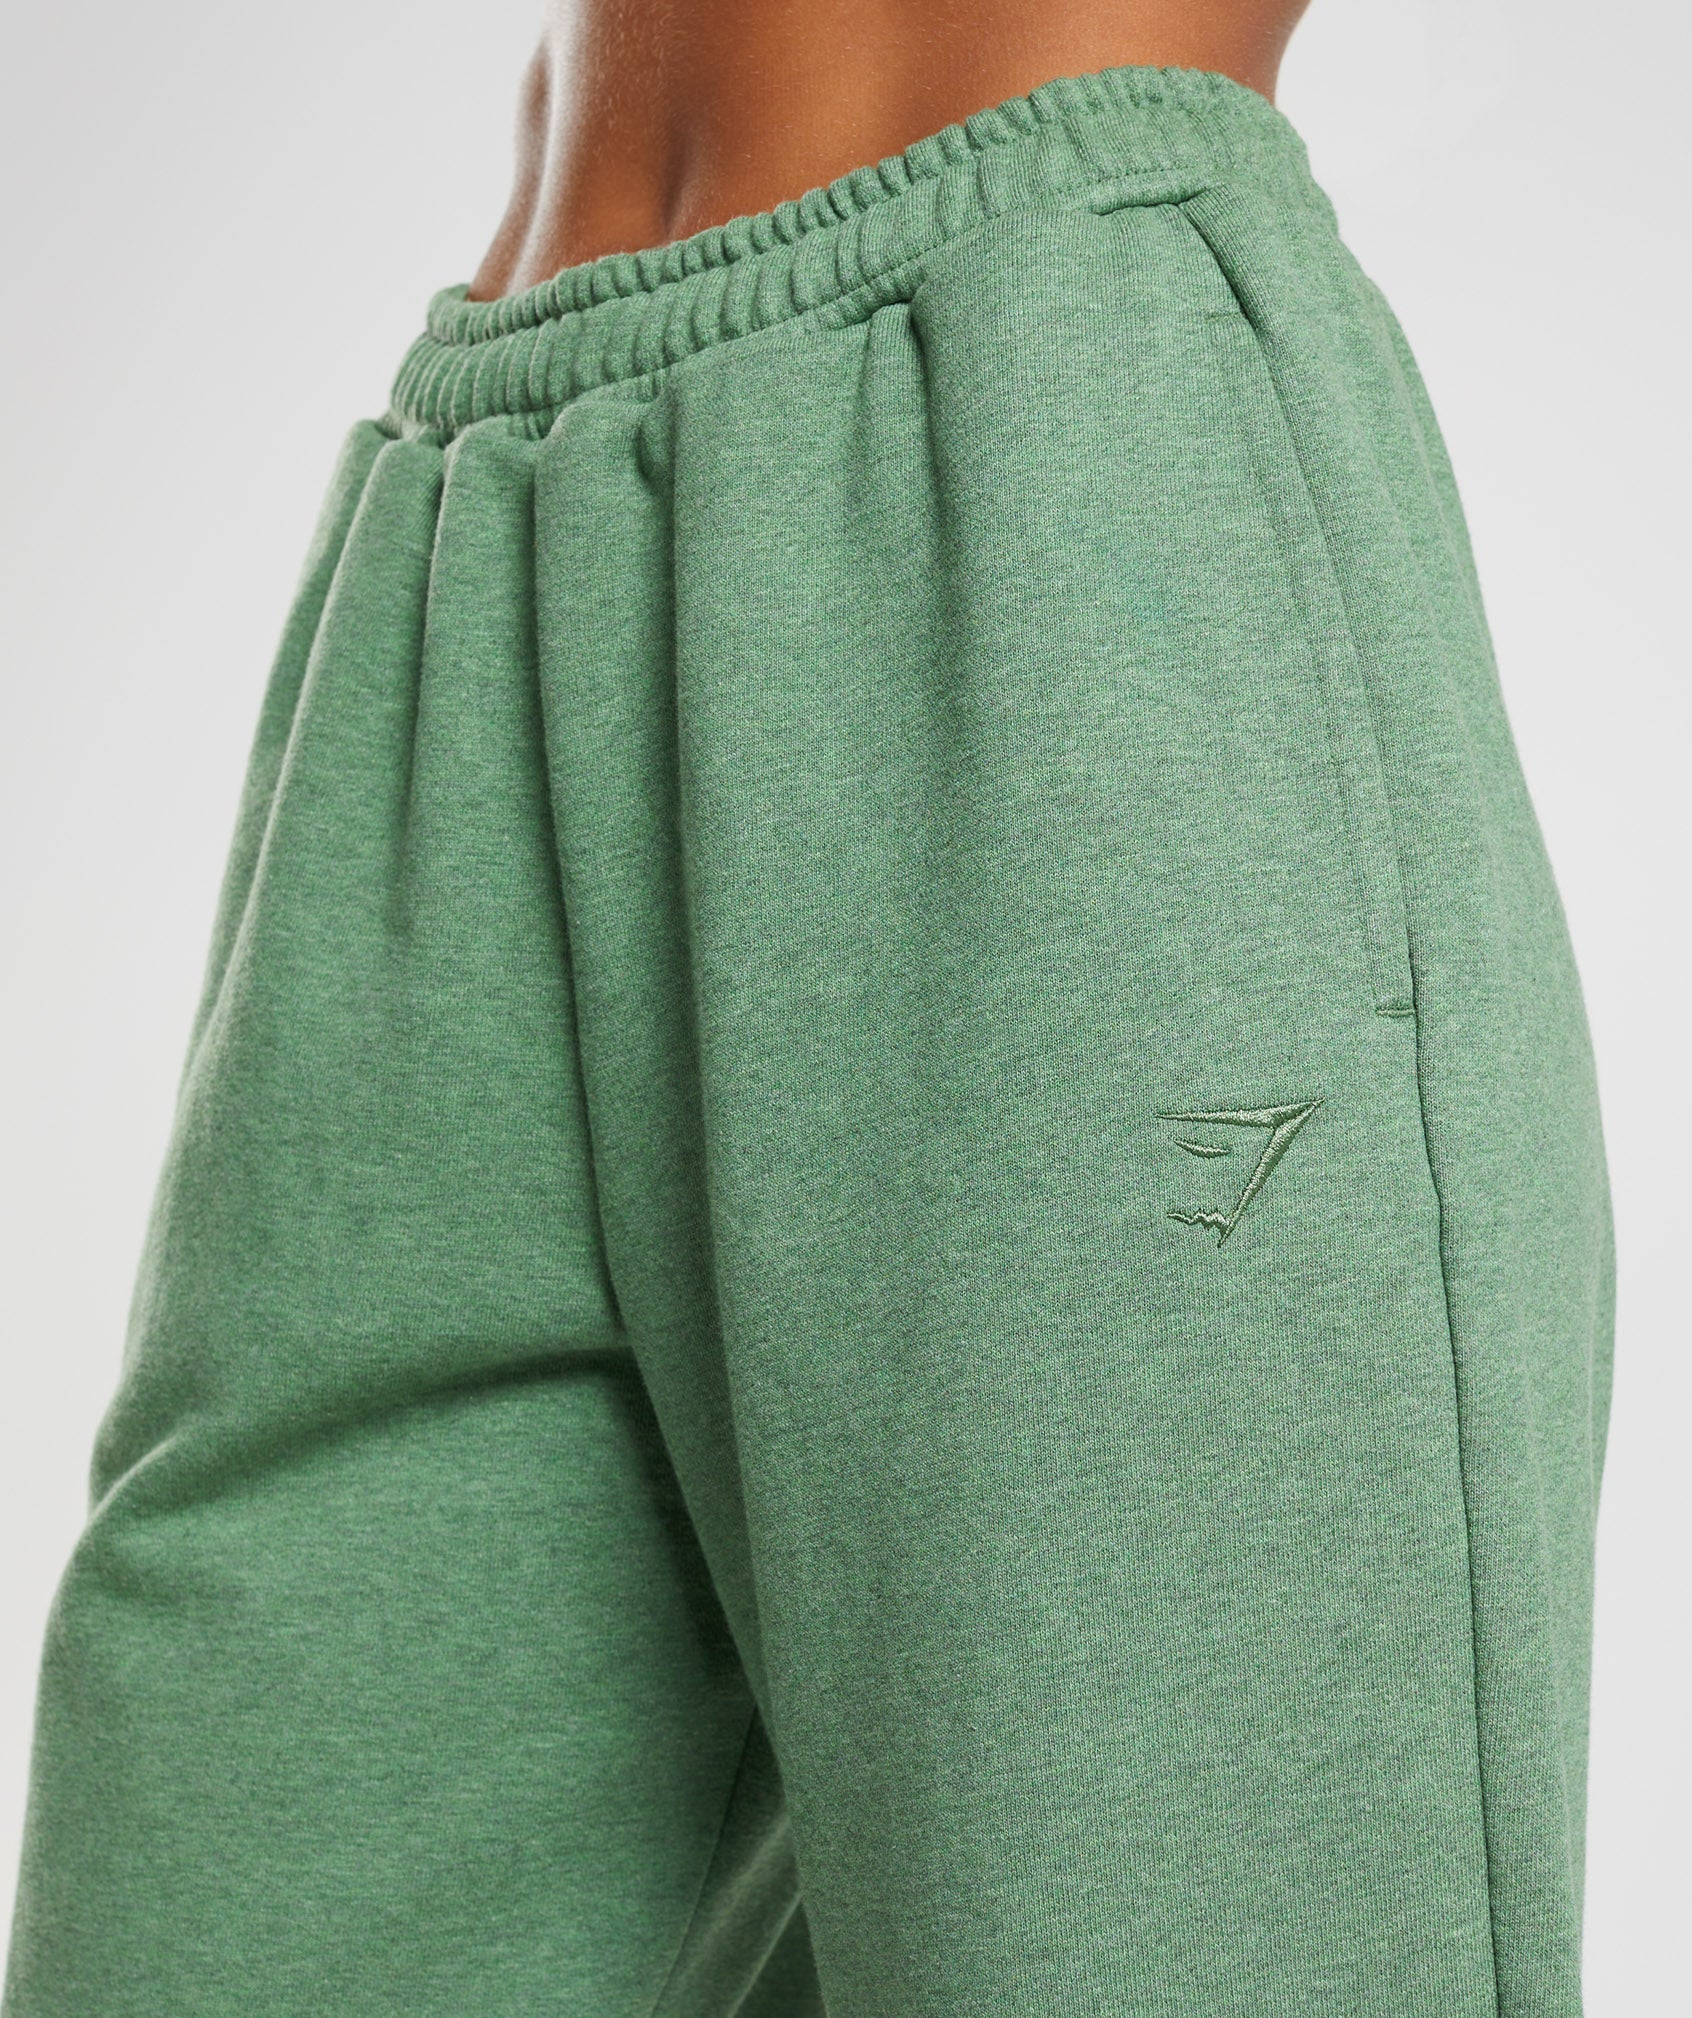 Rest Day Sweats Joggers in Crocodile Green Marl - view 5